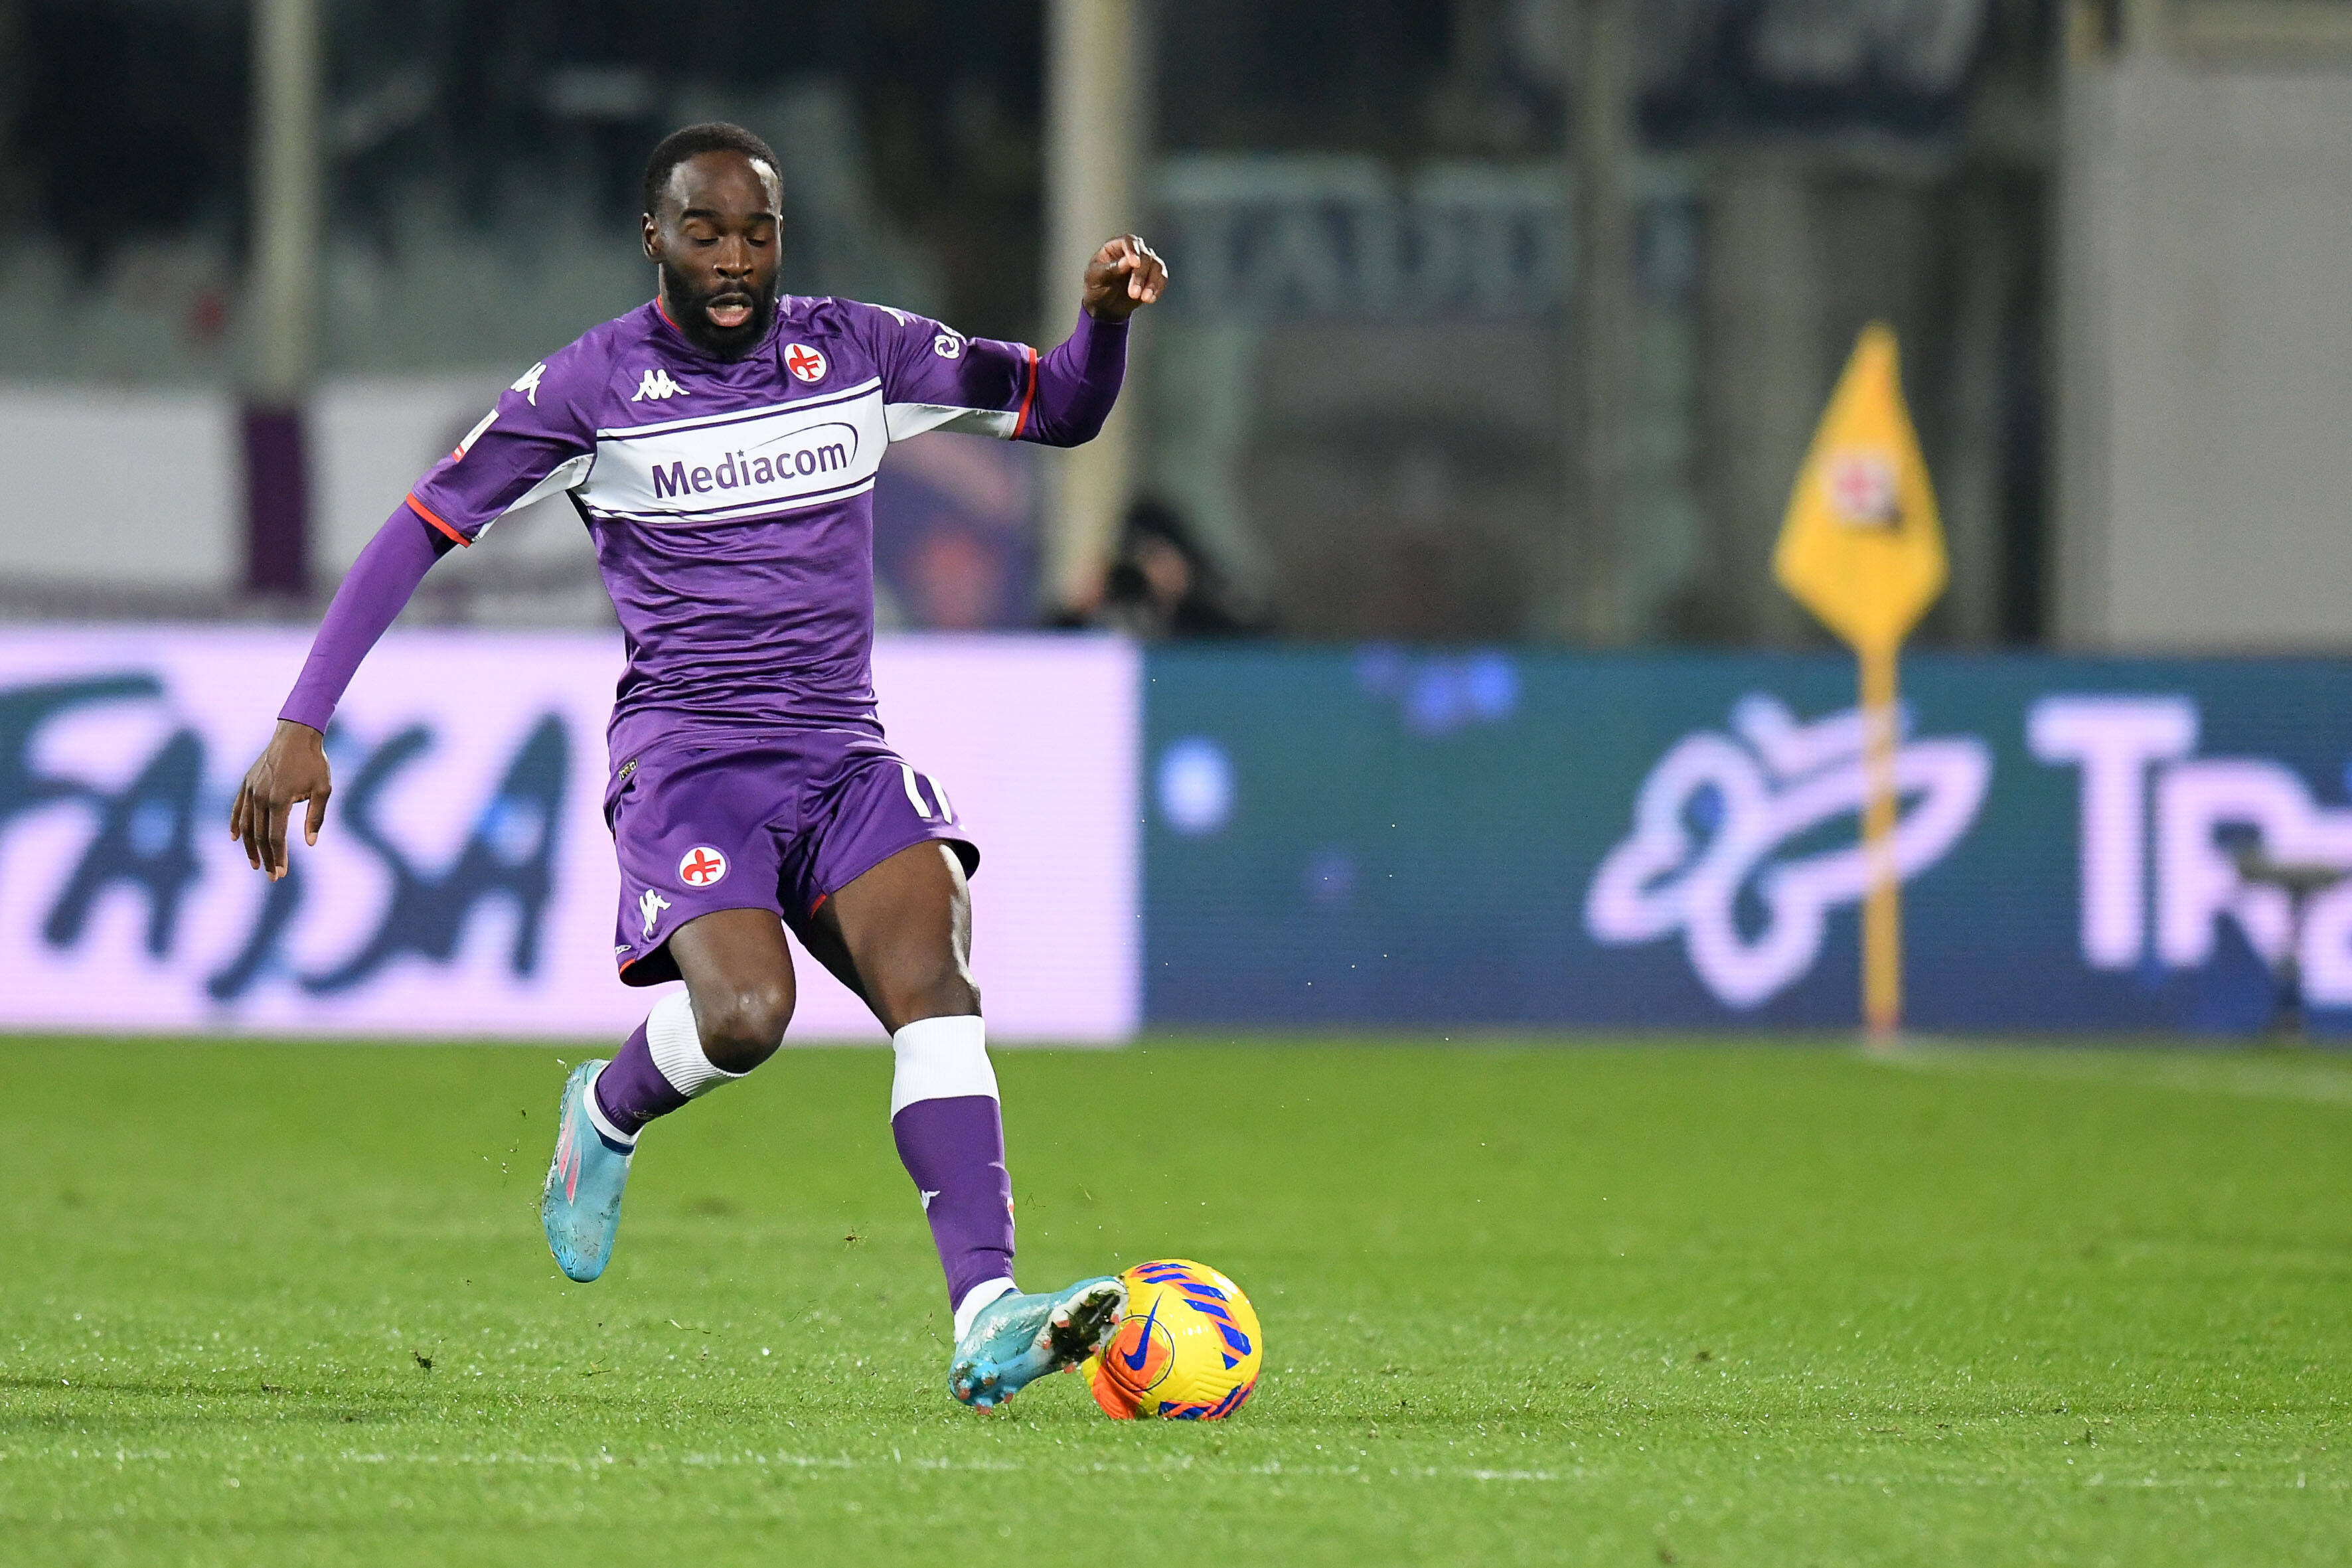 Fiorentina winger Jonathan Ikone was electric out wide for La Viola 